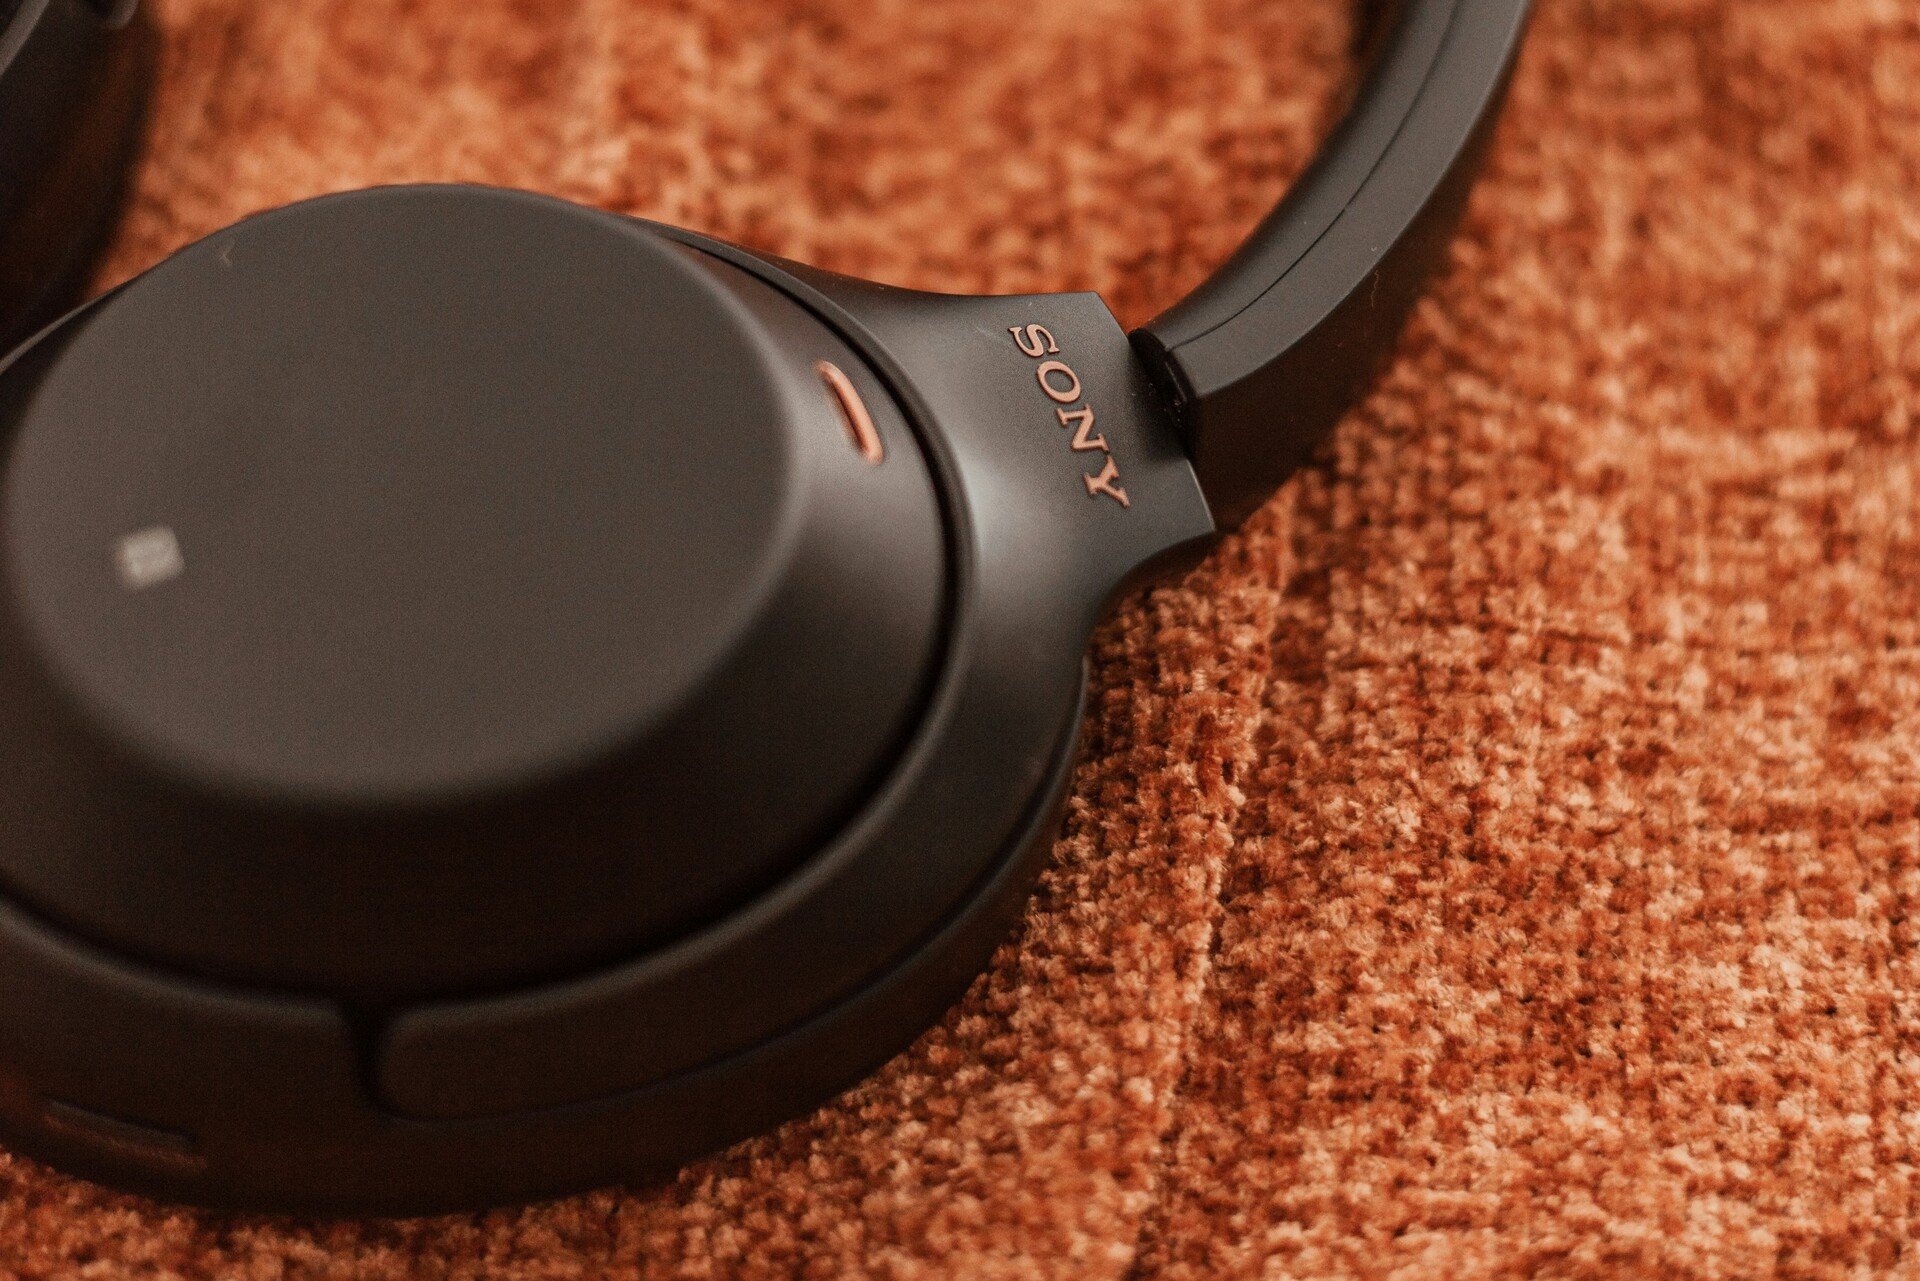 Windows 11’s latest update affects Sony headphones, and not in a good way